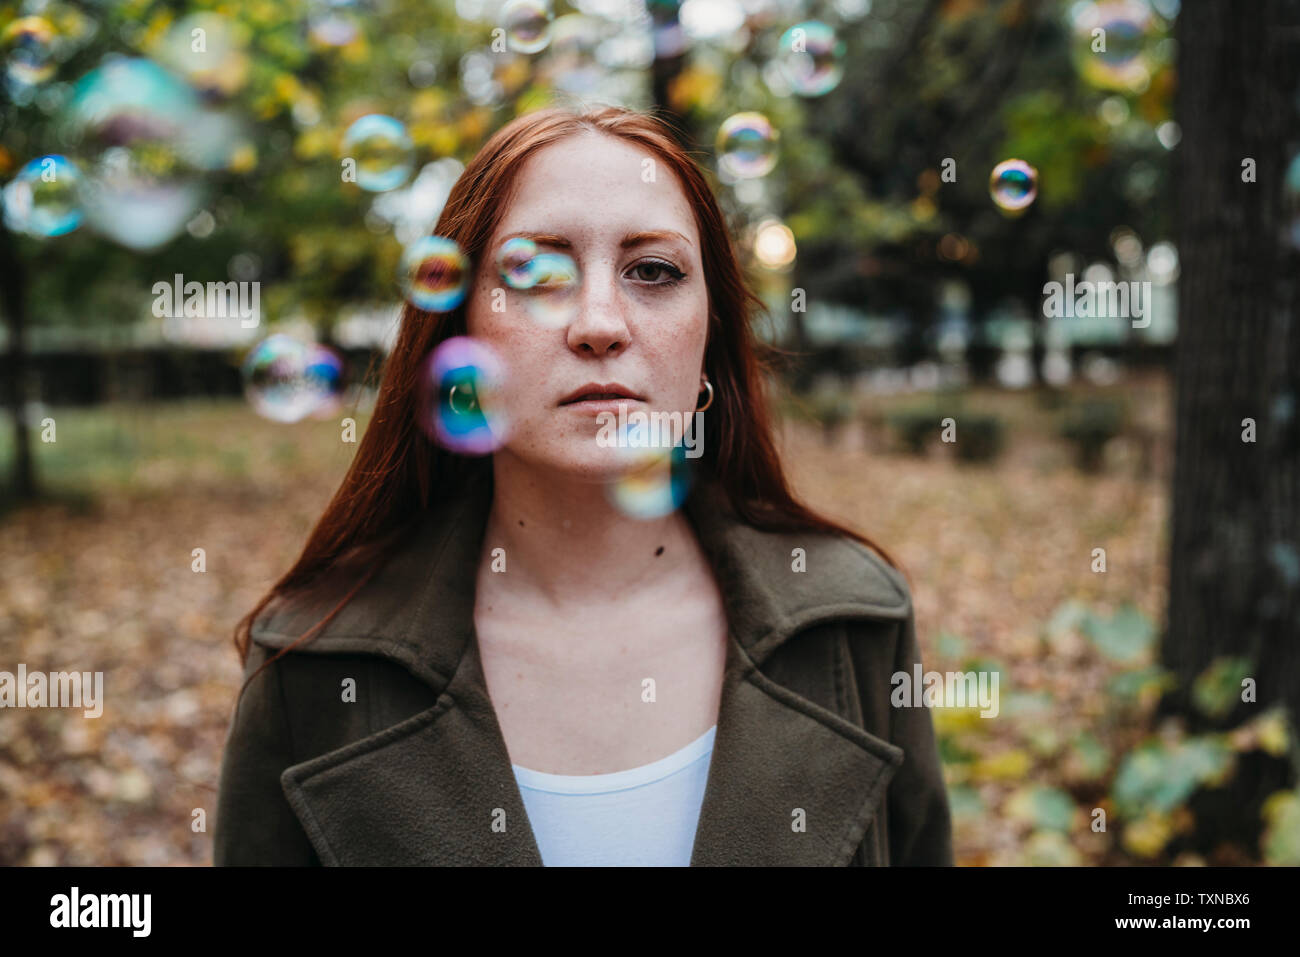 Young woman with long red hair amongst floating bubbles in autumn park, shallow focus portrait Stock Photo